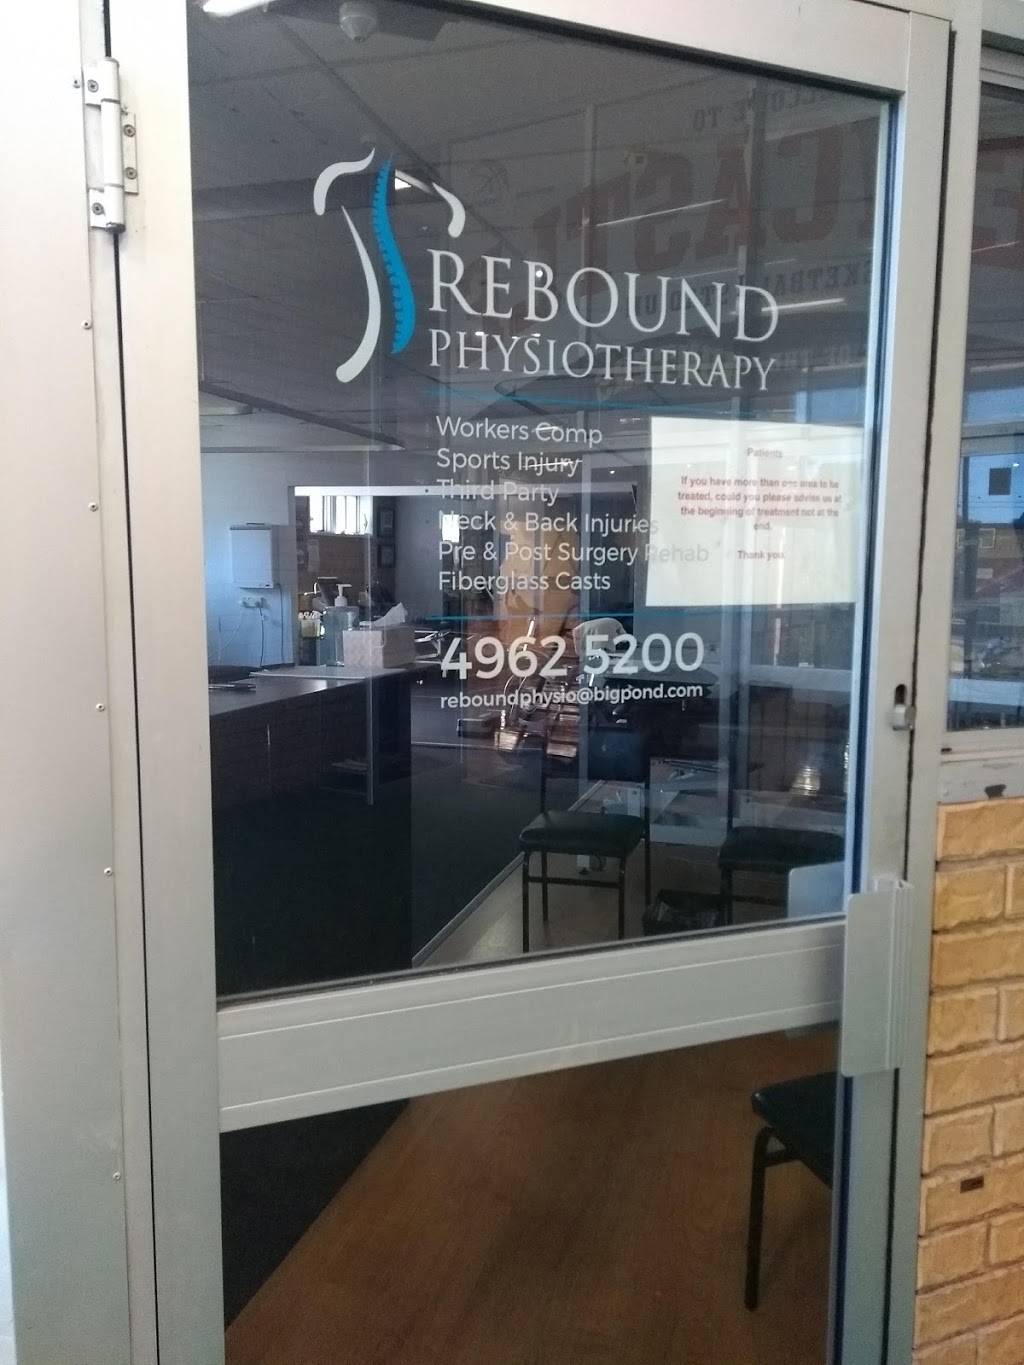 Rebound Physiotherapy | physiotherapist | Unit 4/87 Bailey St, Adamstown NSW 2289, Australia | 0249625200 OR +61 2 4962 5200